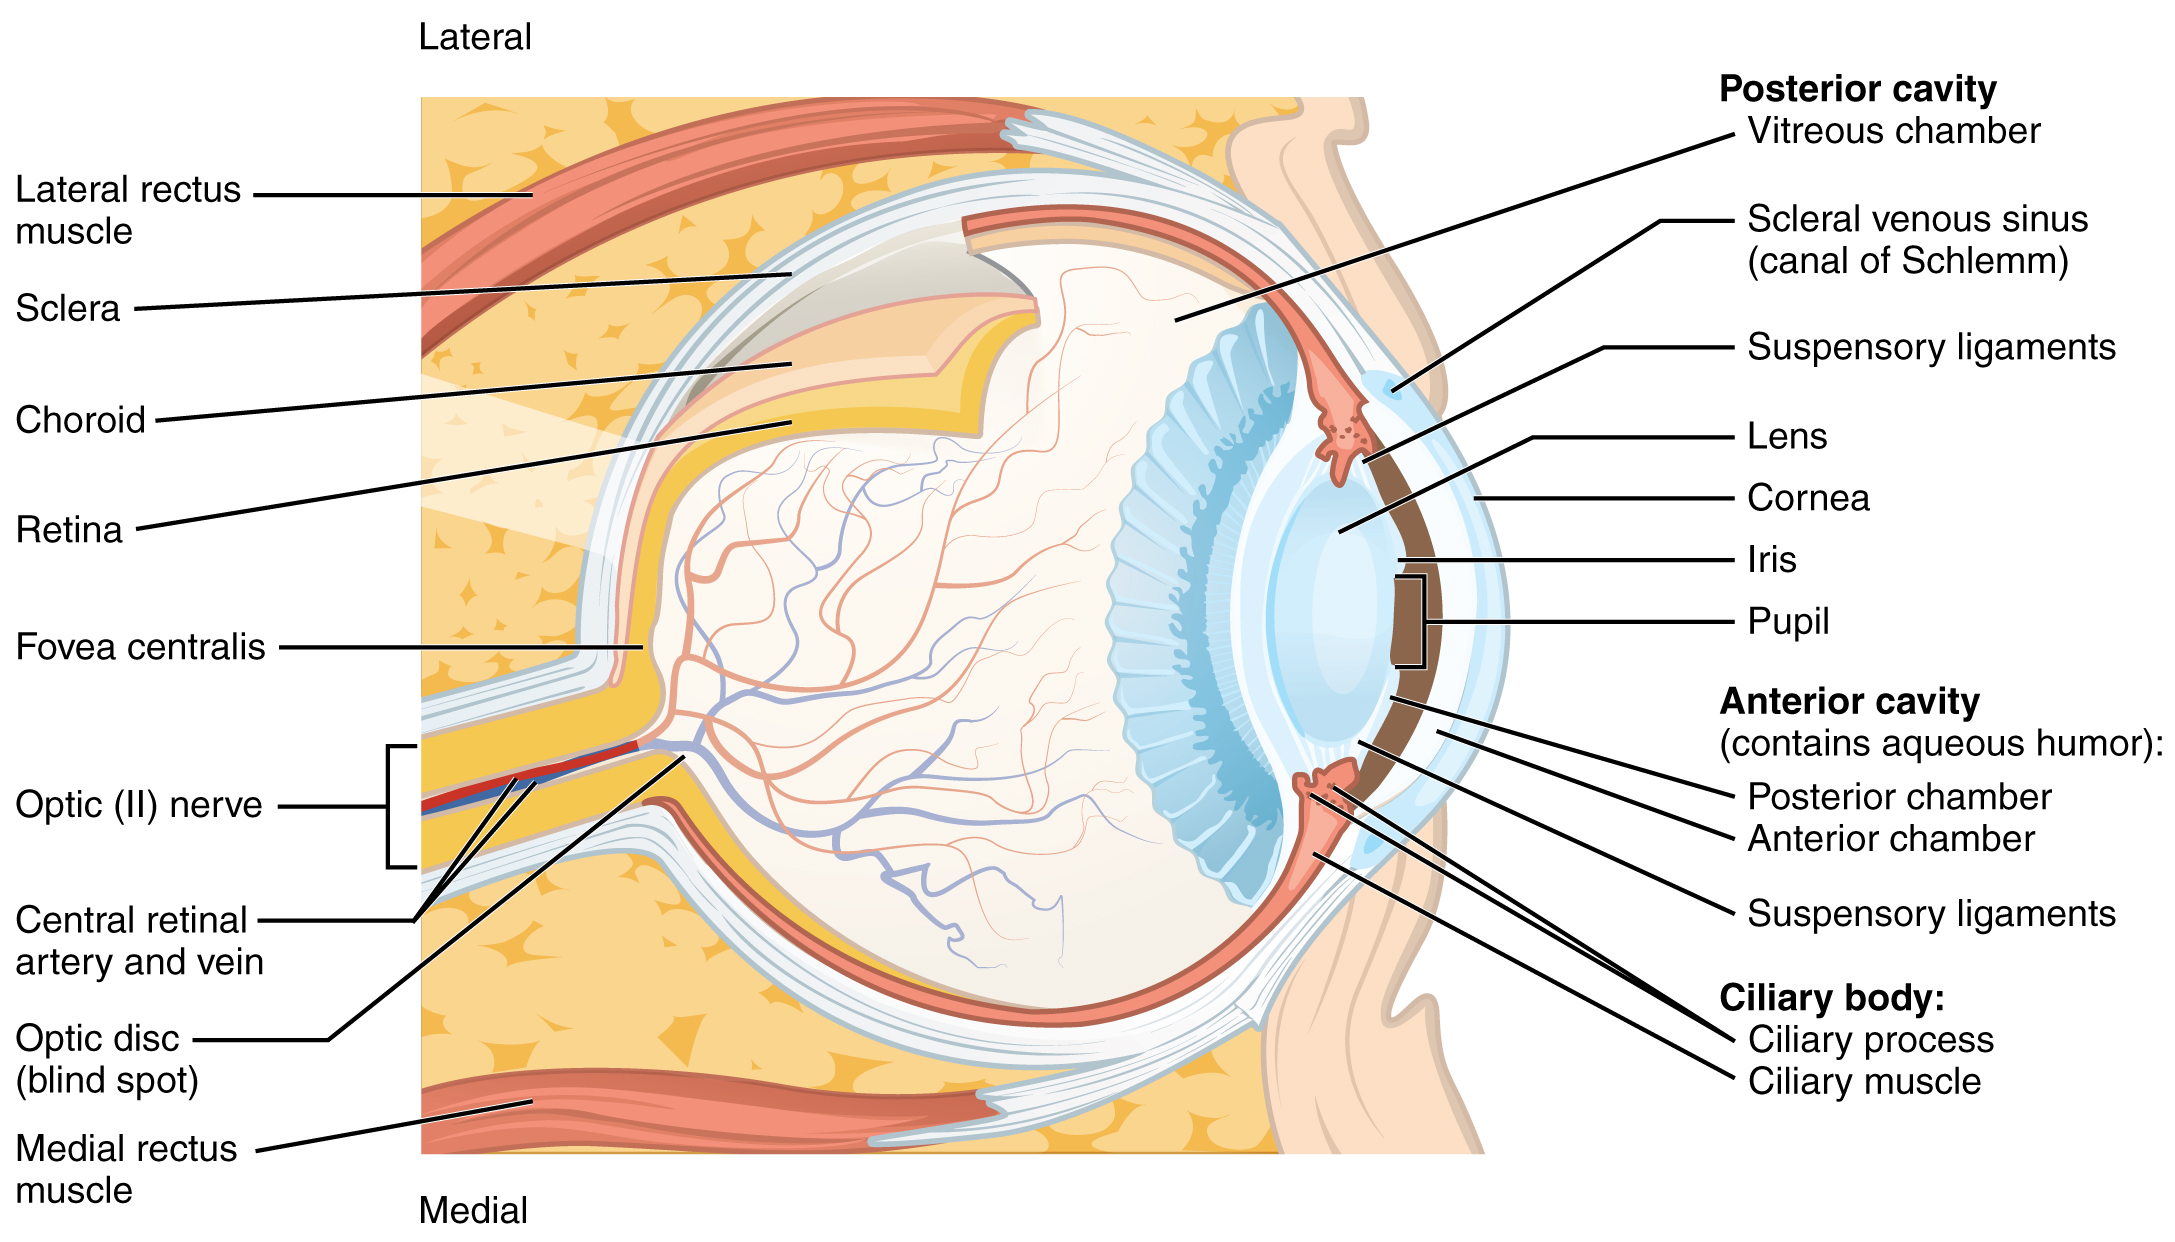 This diagram shows the structure of the eye with the major parts labeled.